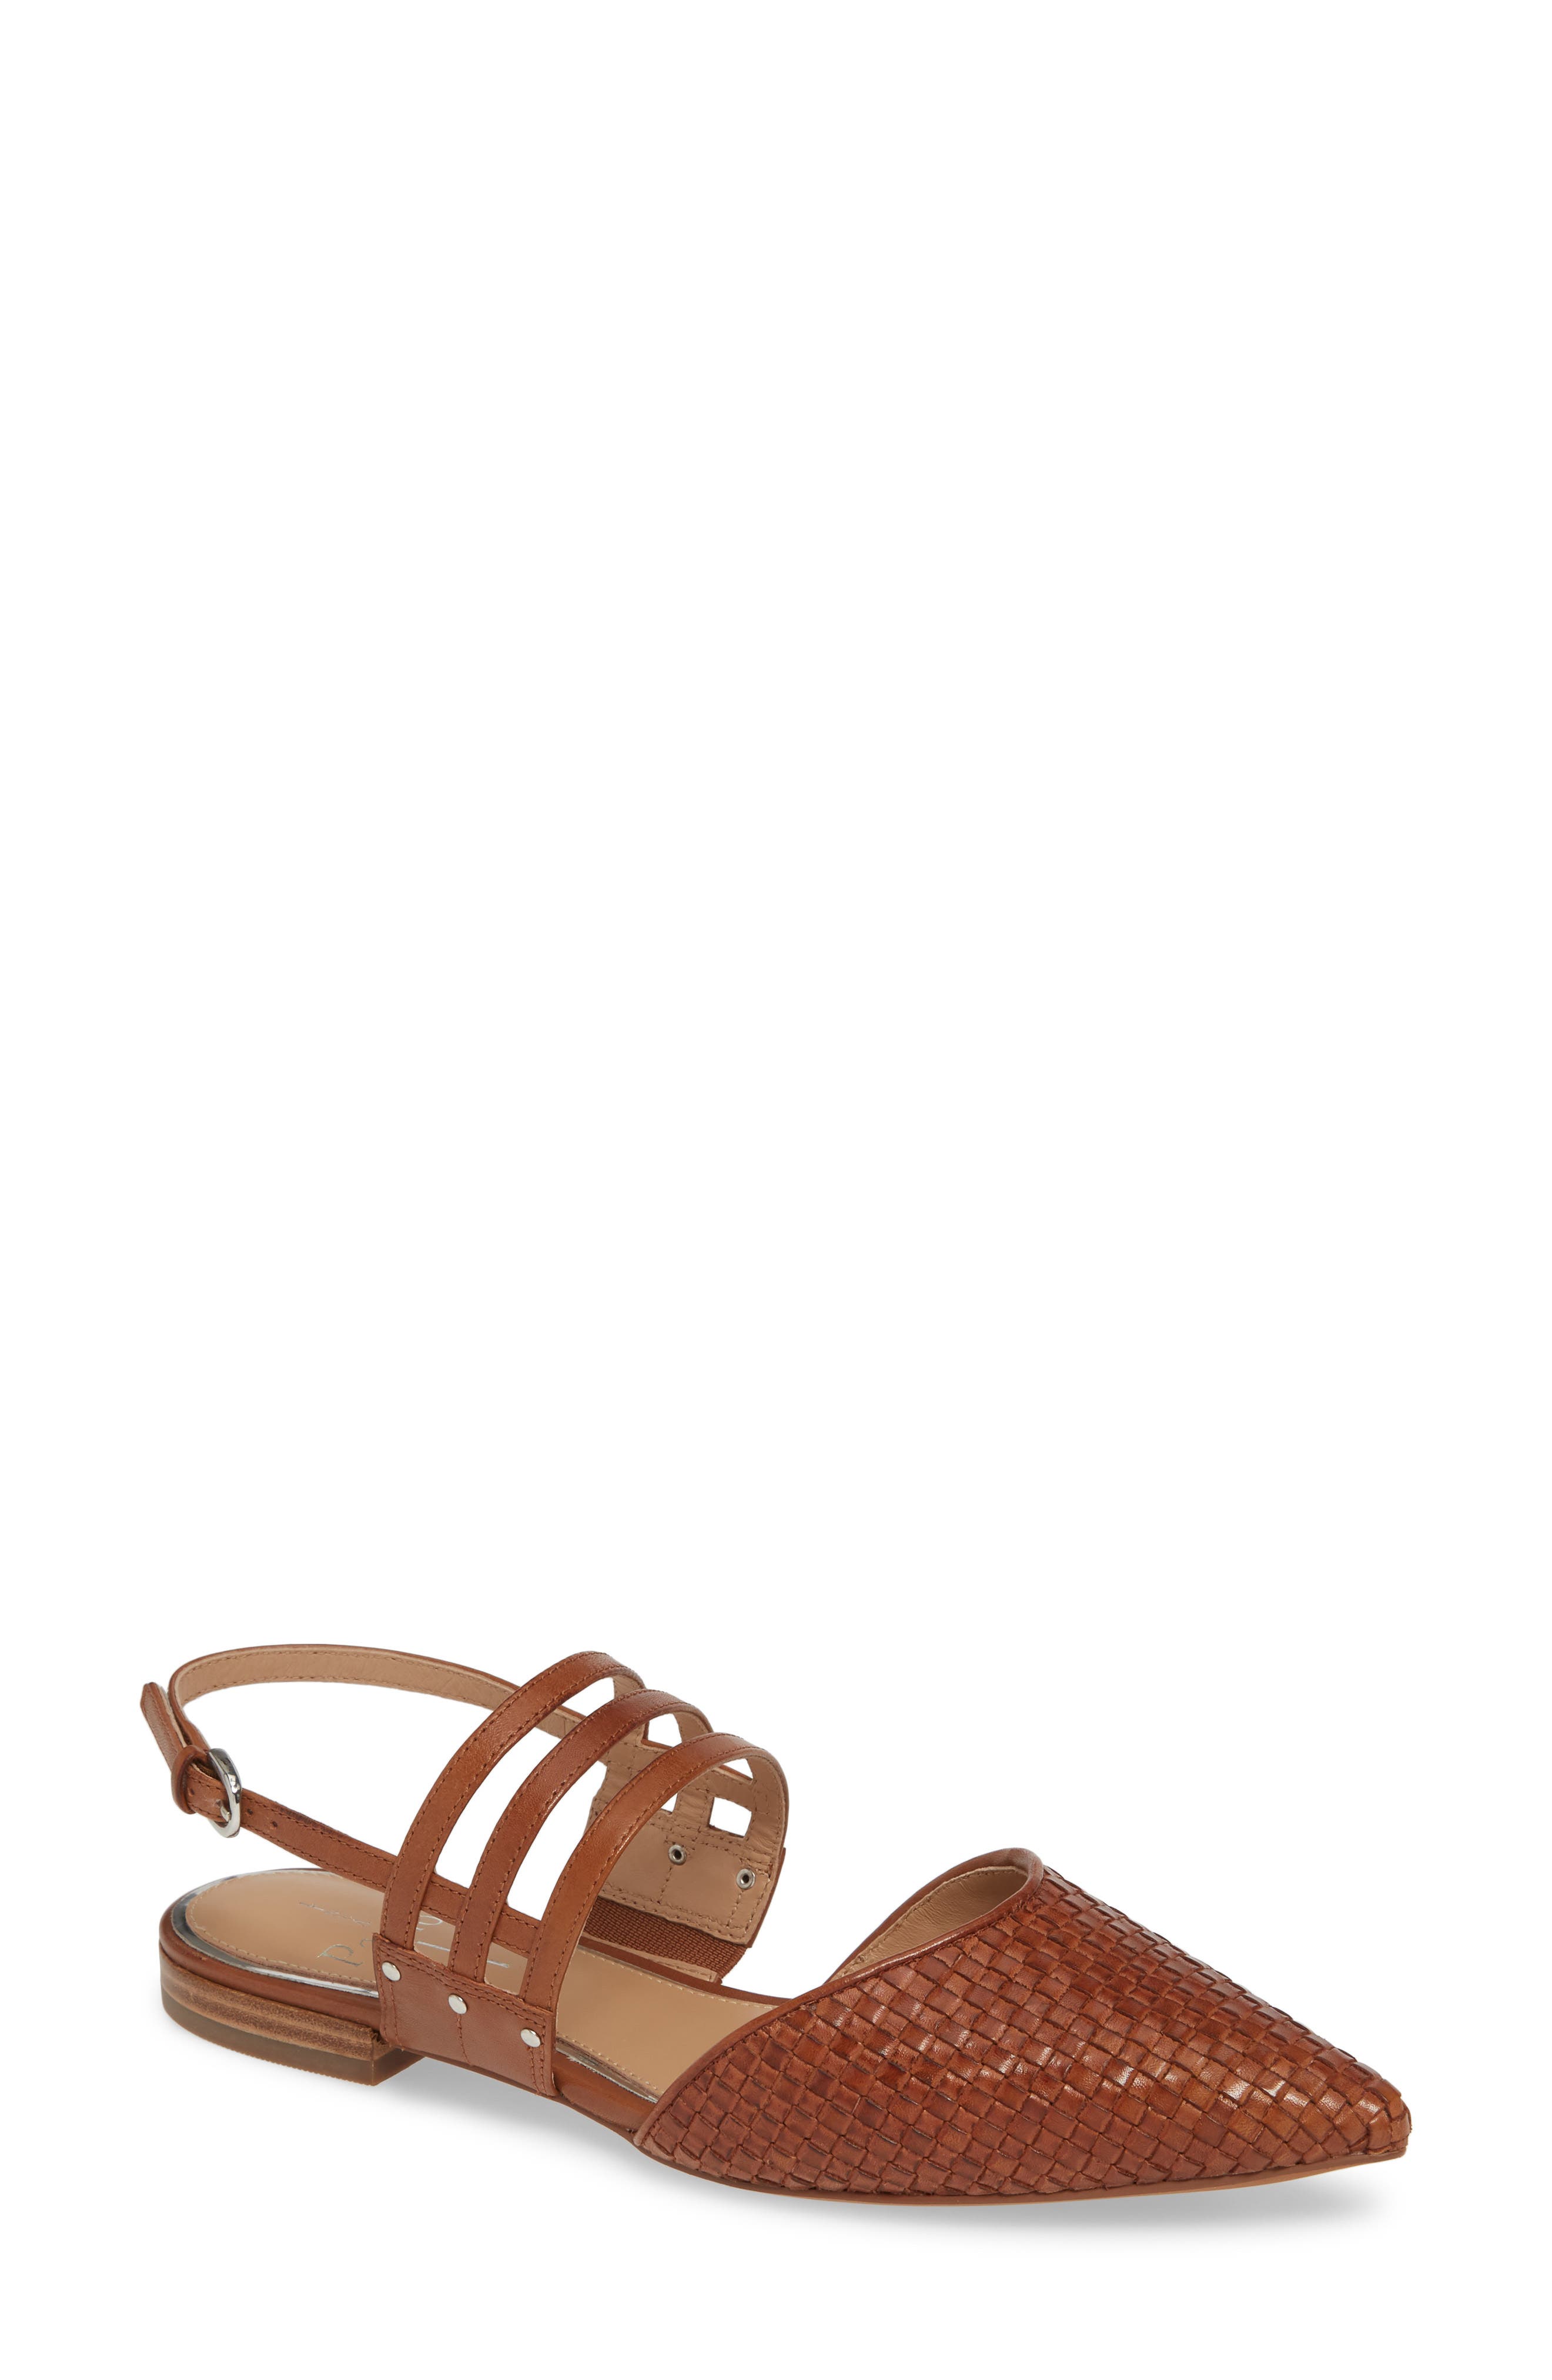 linea paolo shoes nordstrom rack